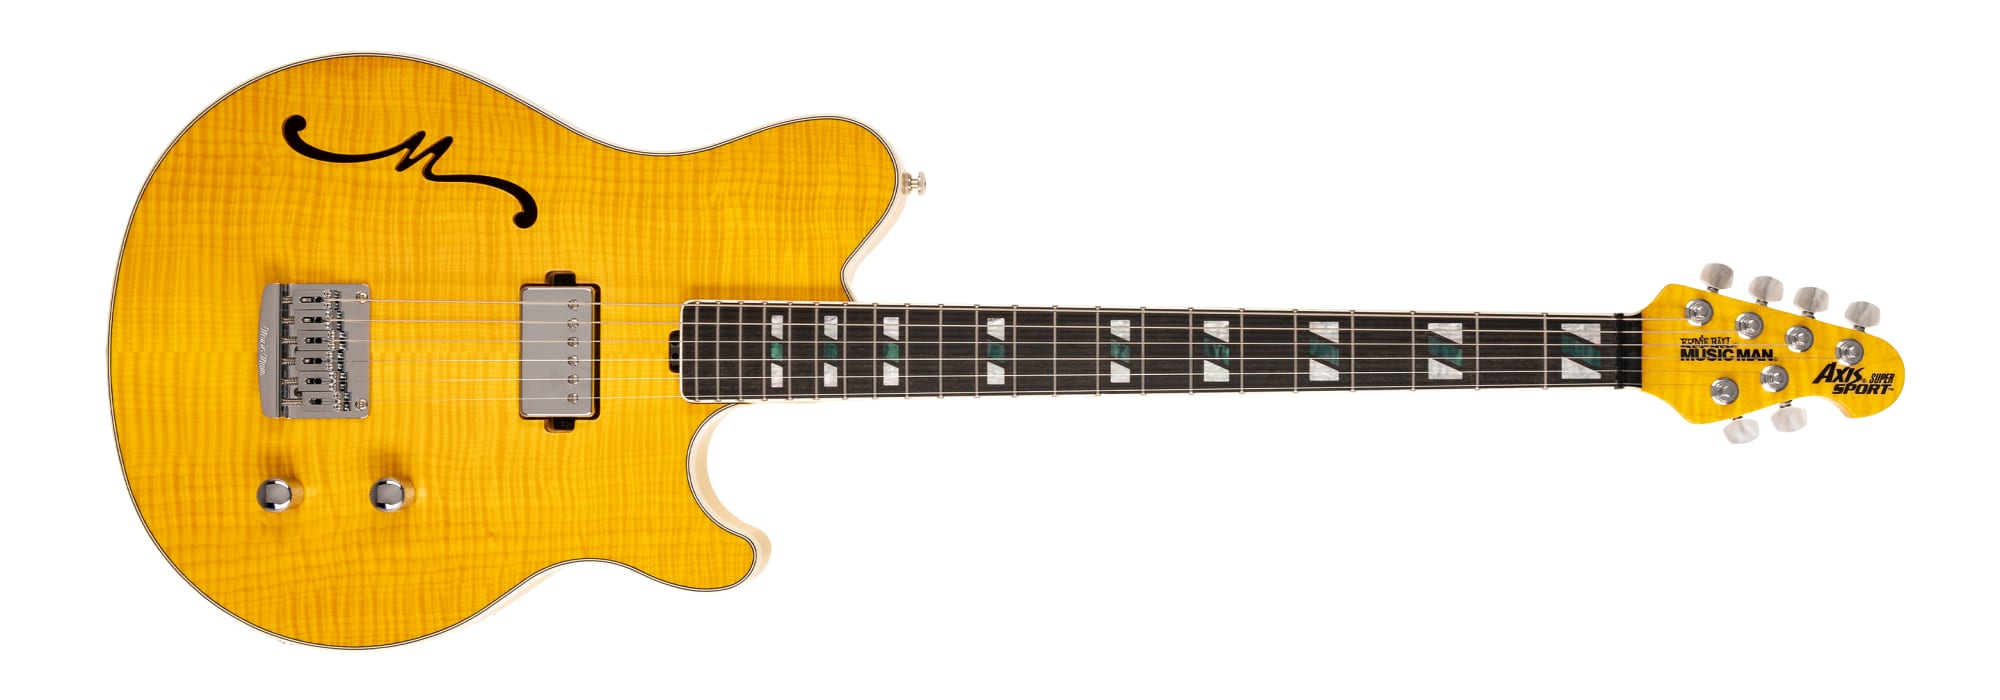 Axis Semi Hollow Buttery Blonde